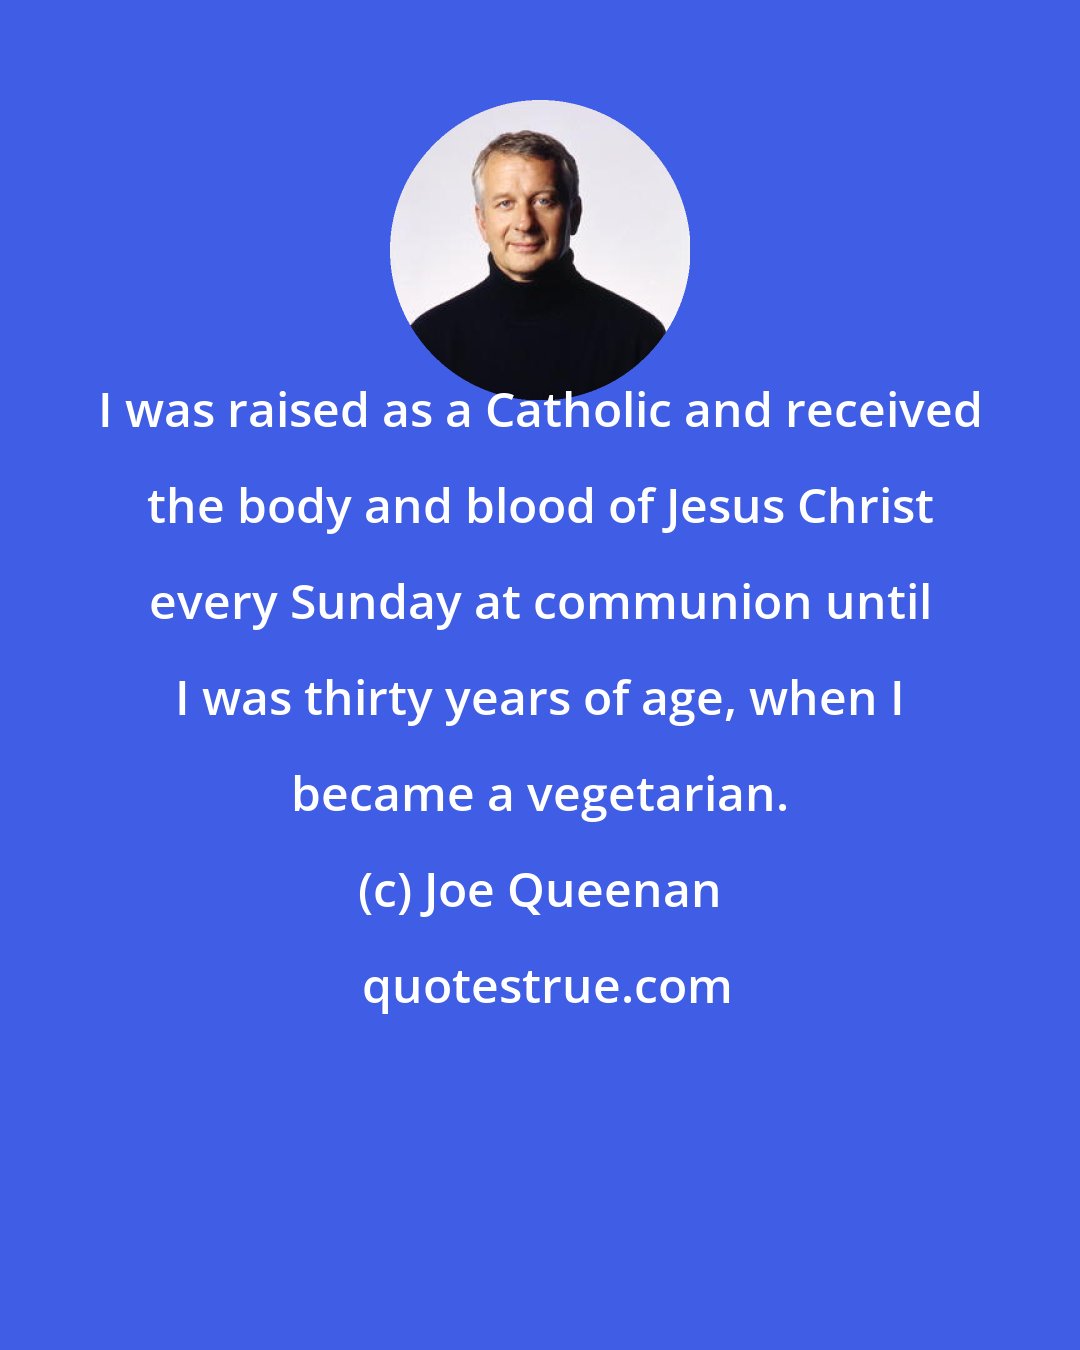 Joe Queenan: I was raised as a Catholic and received the body and blood of Jesus Christ every Sunday at communion until I was thirty years of age, when I became a vegetarian.